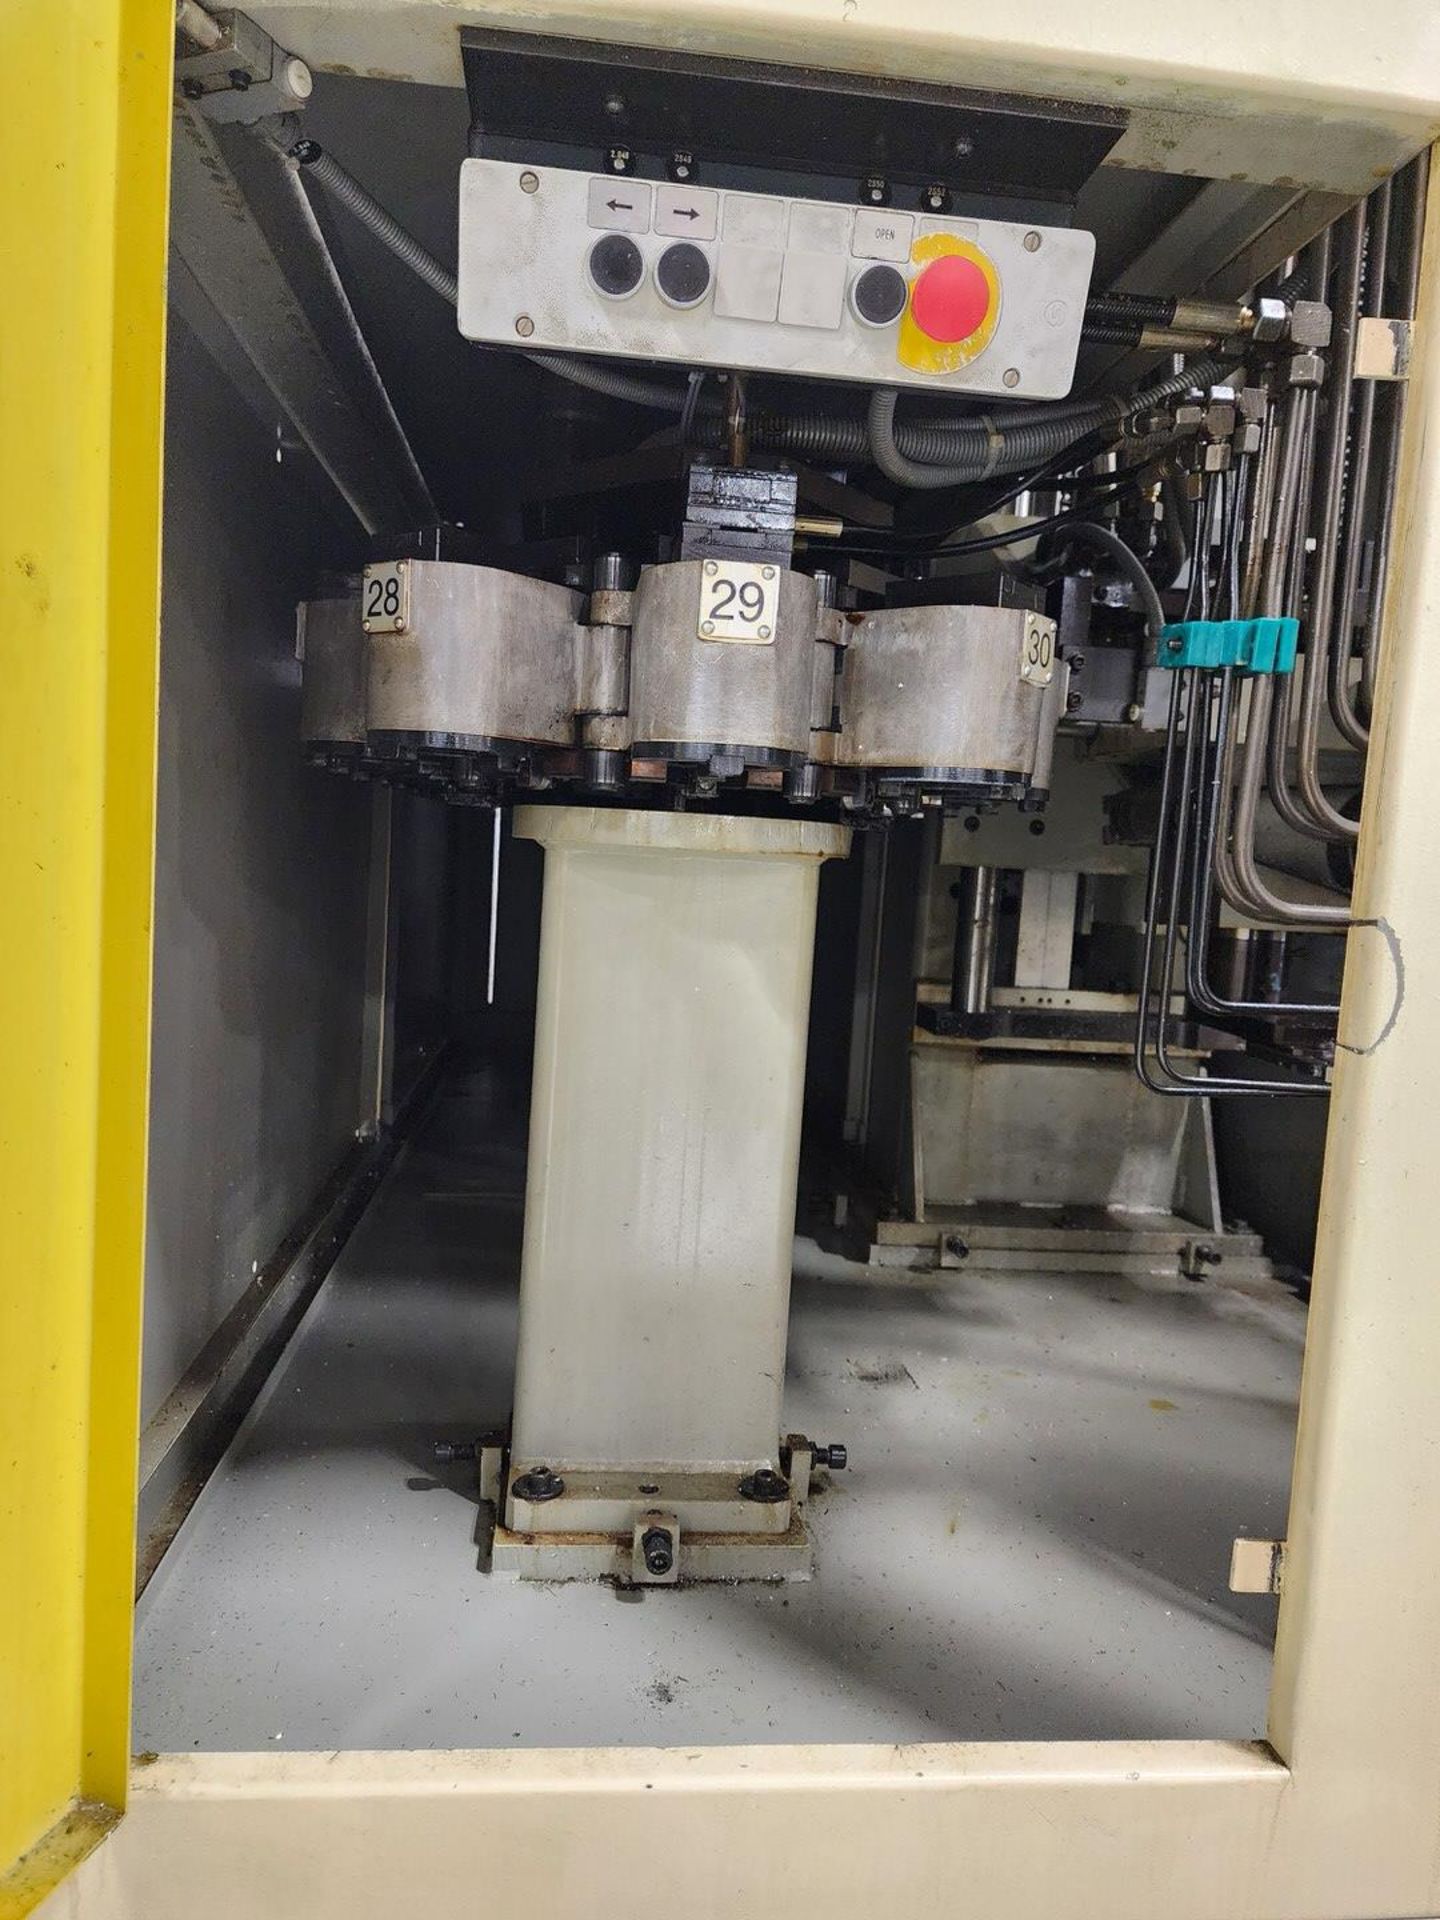 SIP SIP-640 Jig Boring Machine W/ Fanuc Series 16i-M Controller; Cutting Time: 15,304hrs - Image 23 of 36